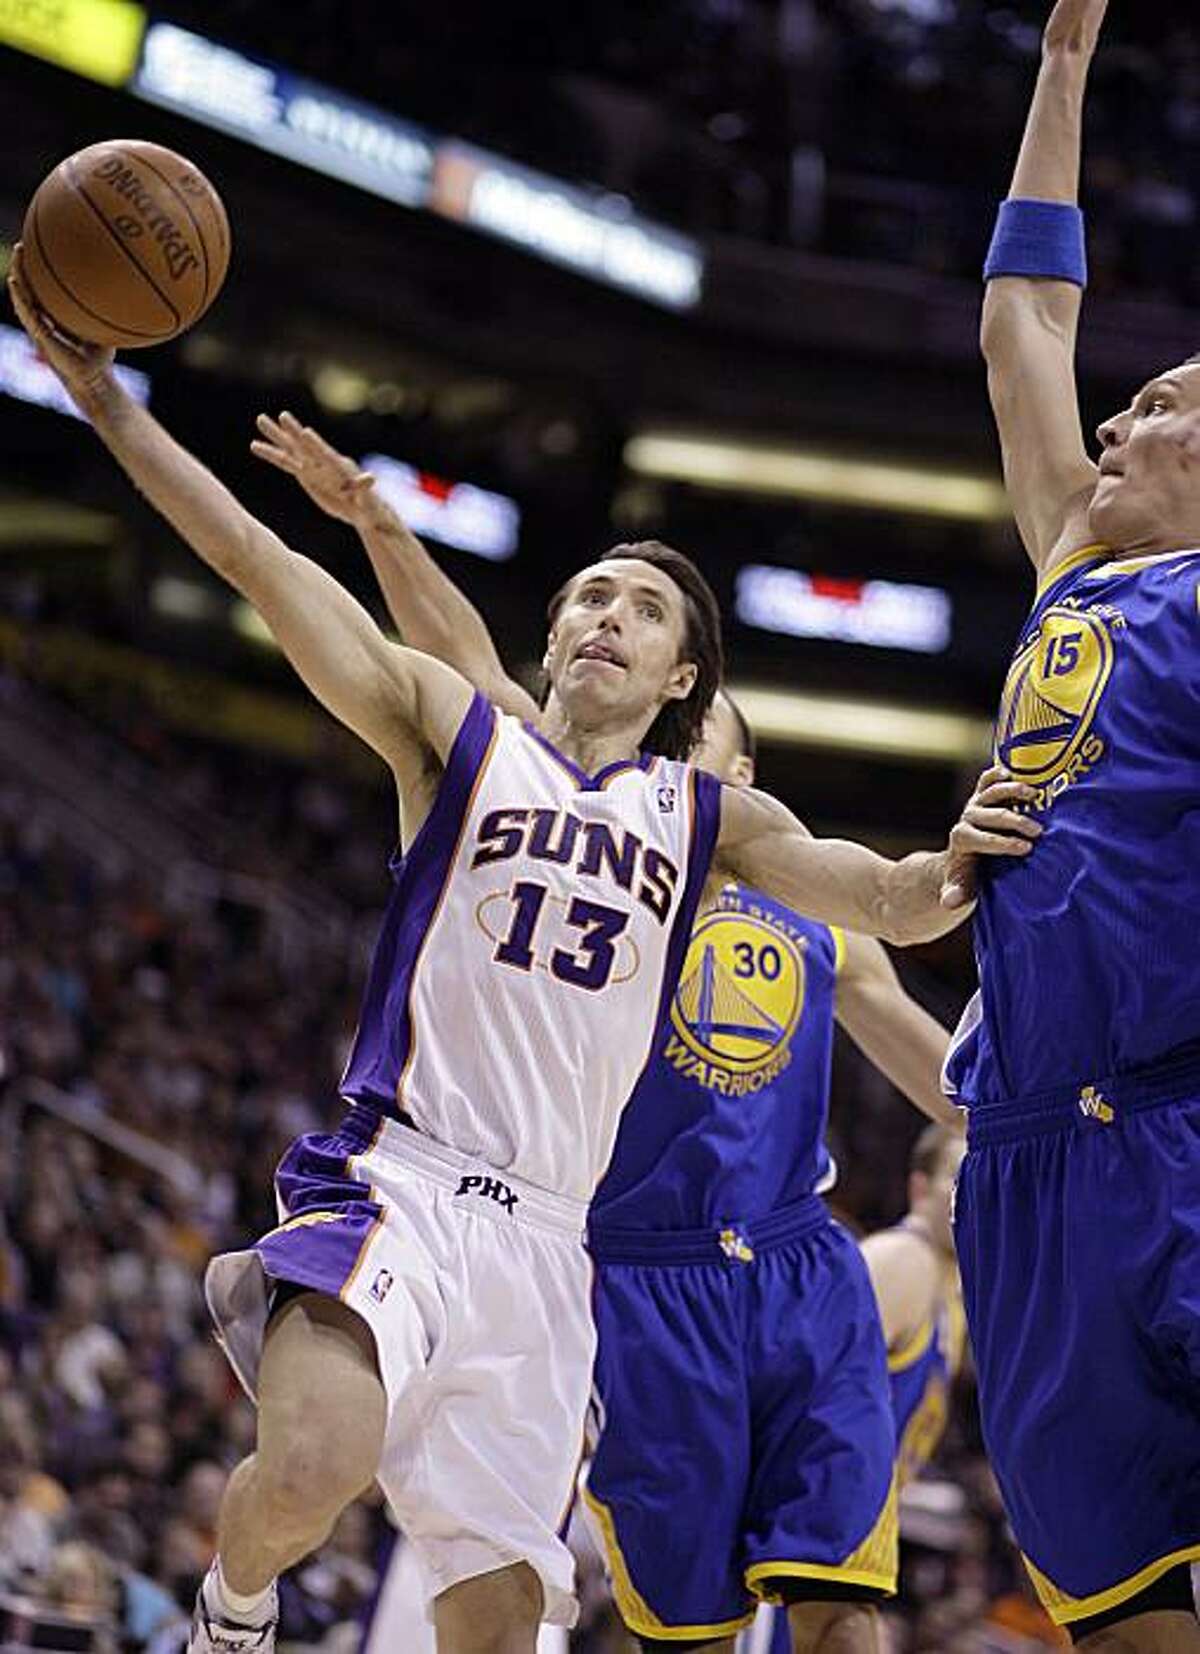 Phoenix Suns guard Steve Nash, left, drives past Golden State Warriors center Andris Biedrins, right, of Latvia, and guard Stephen Curry, rear, on his way to the basket in the second quarter of an NBA basketball game Thursday, Feb. 10, 2011, in Phoenix.